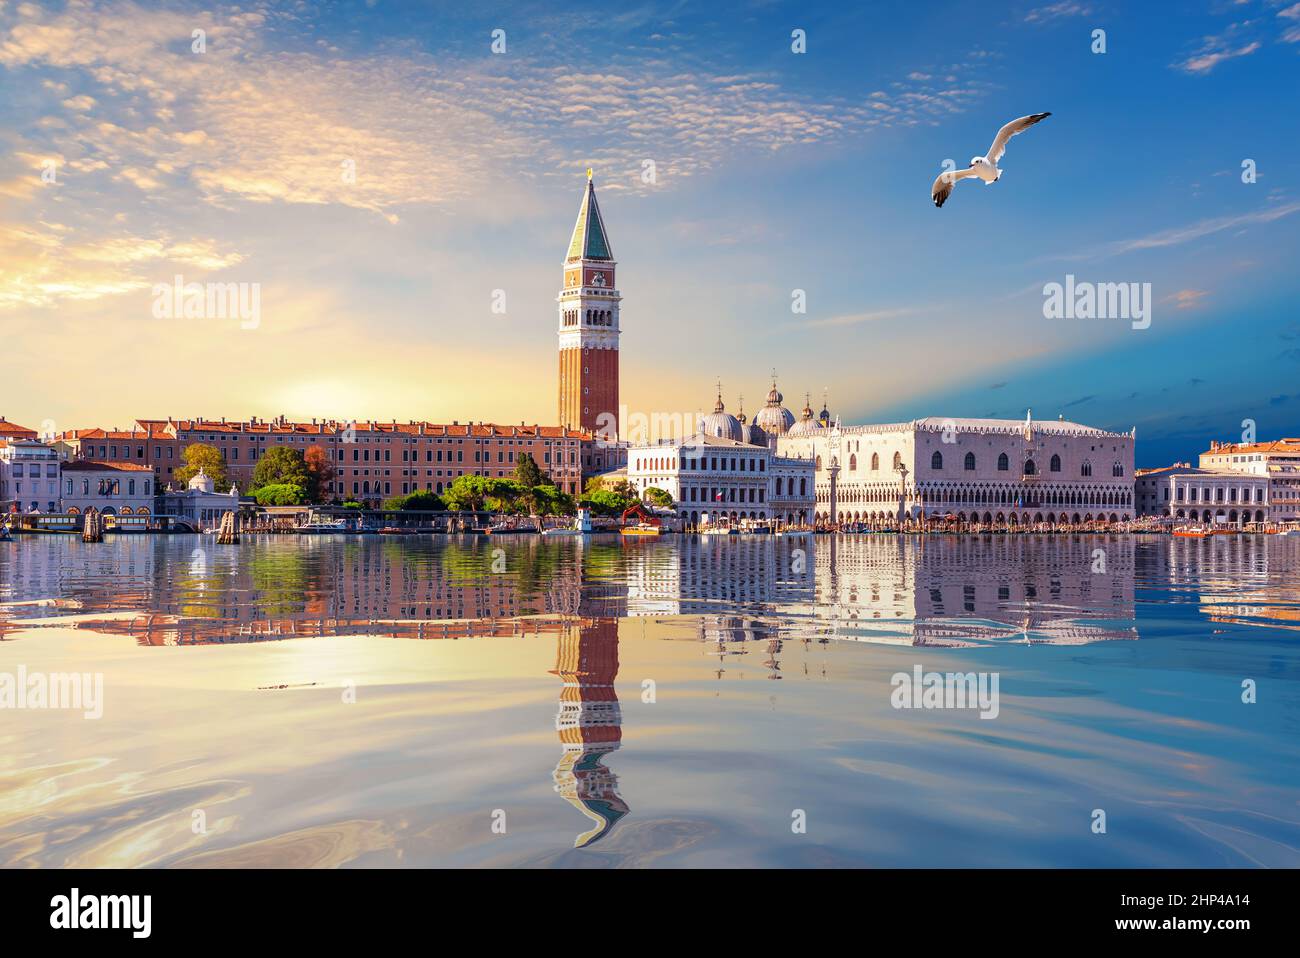 Seagull flies by San Marco and Doge's Palace at sunset, Venice, Italy. Stock Photo